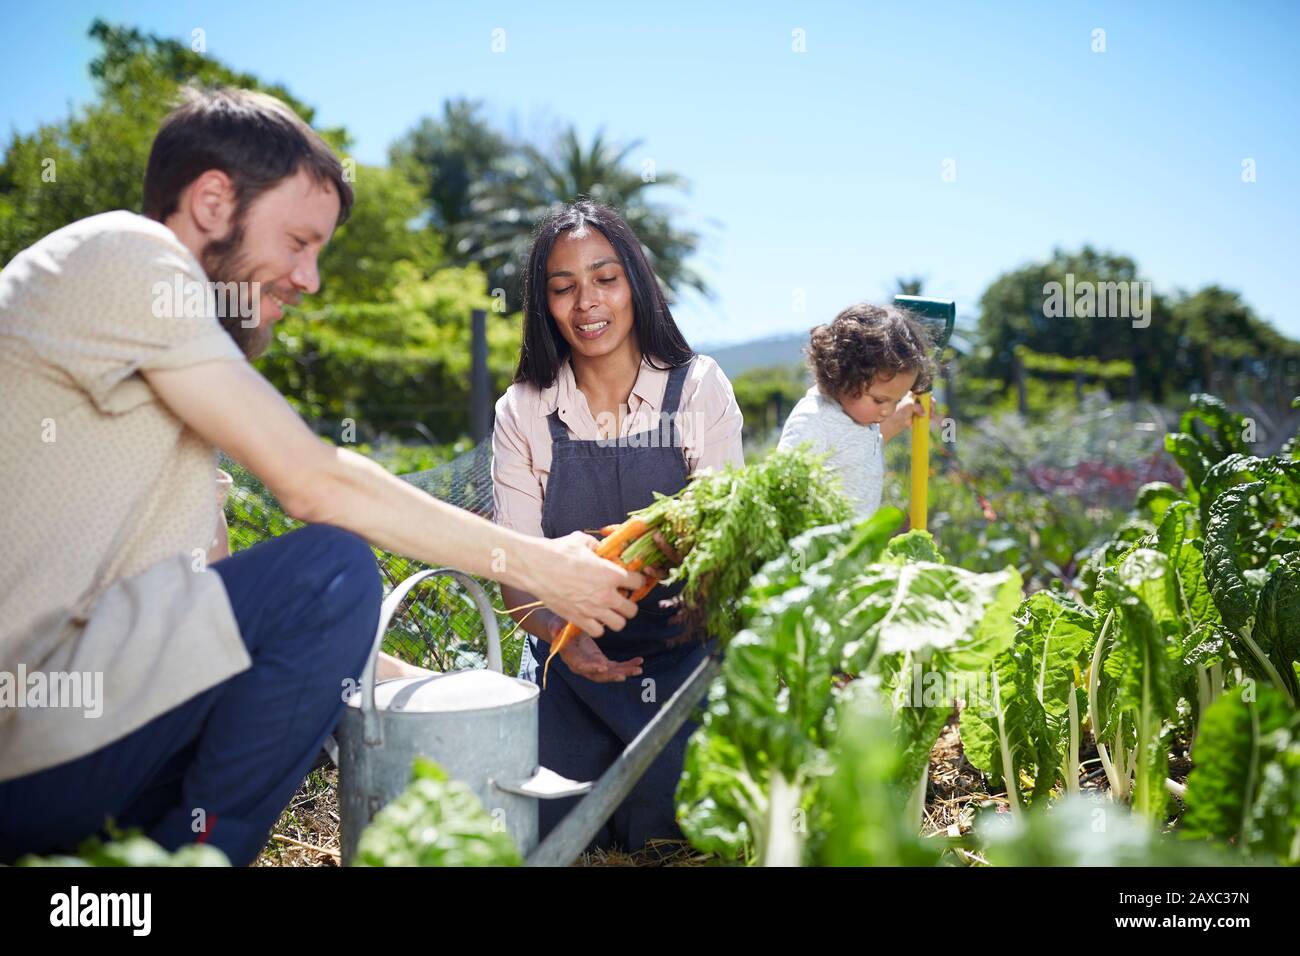 Young couple harvesting carrots in sunny vegetable garden Stock Photo